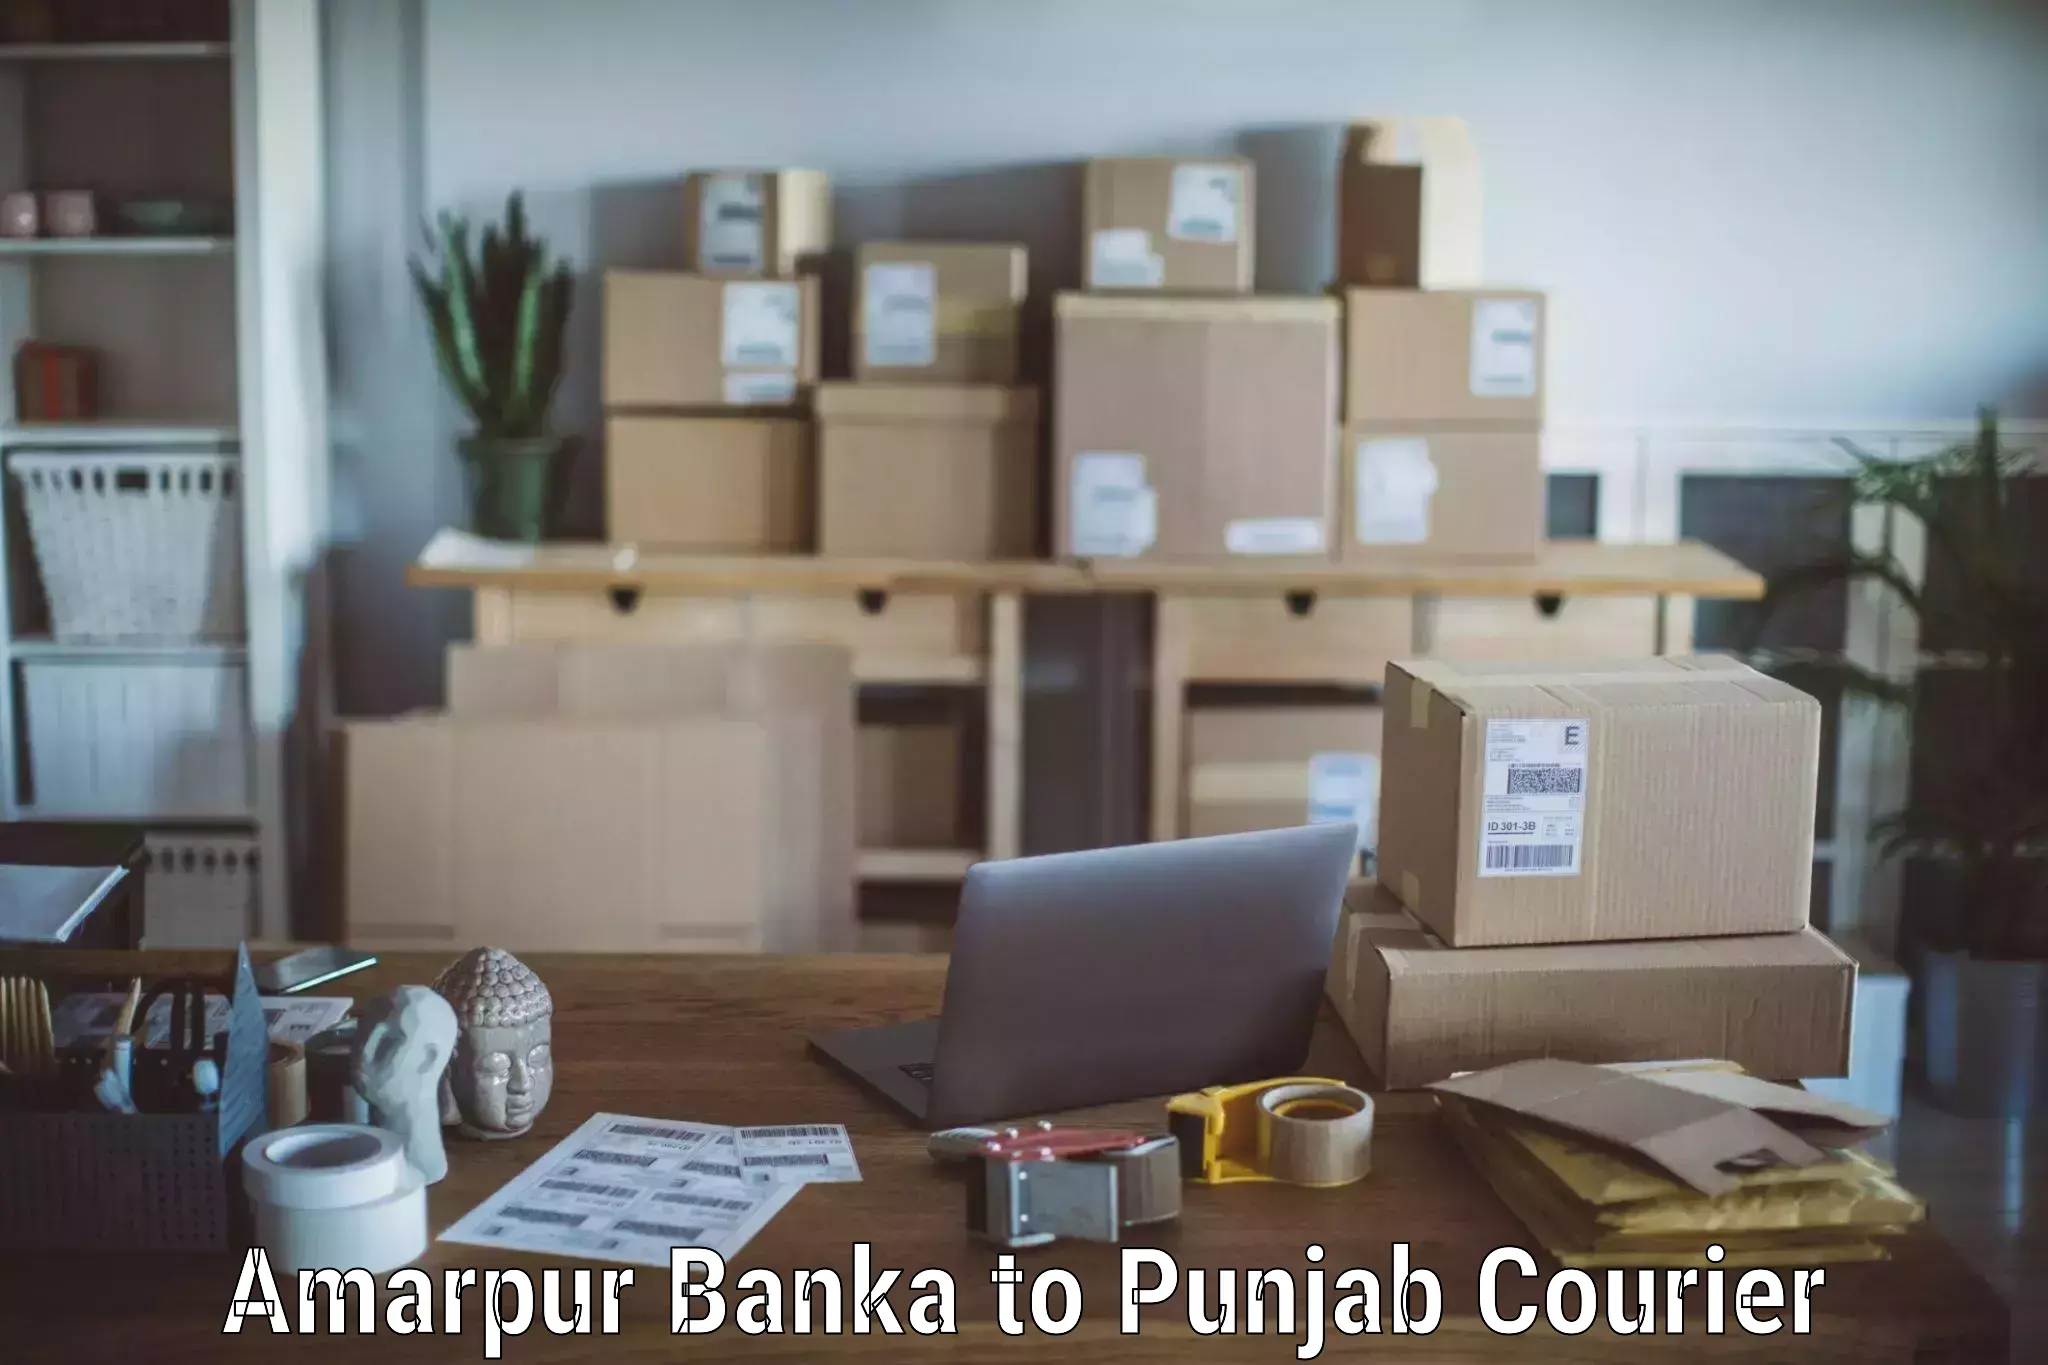 High-quality moving services Amarpur Banka to Mohali